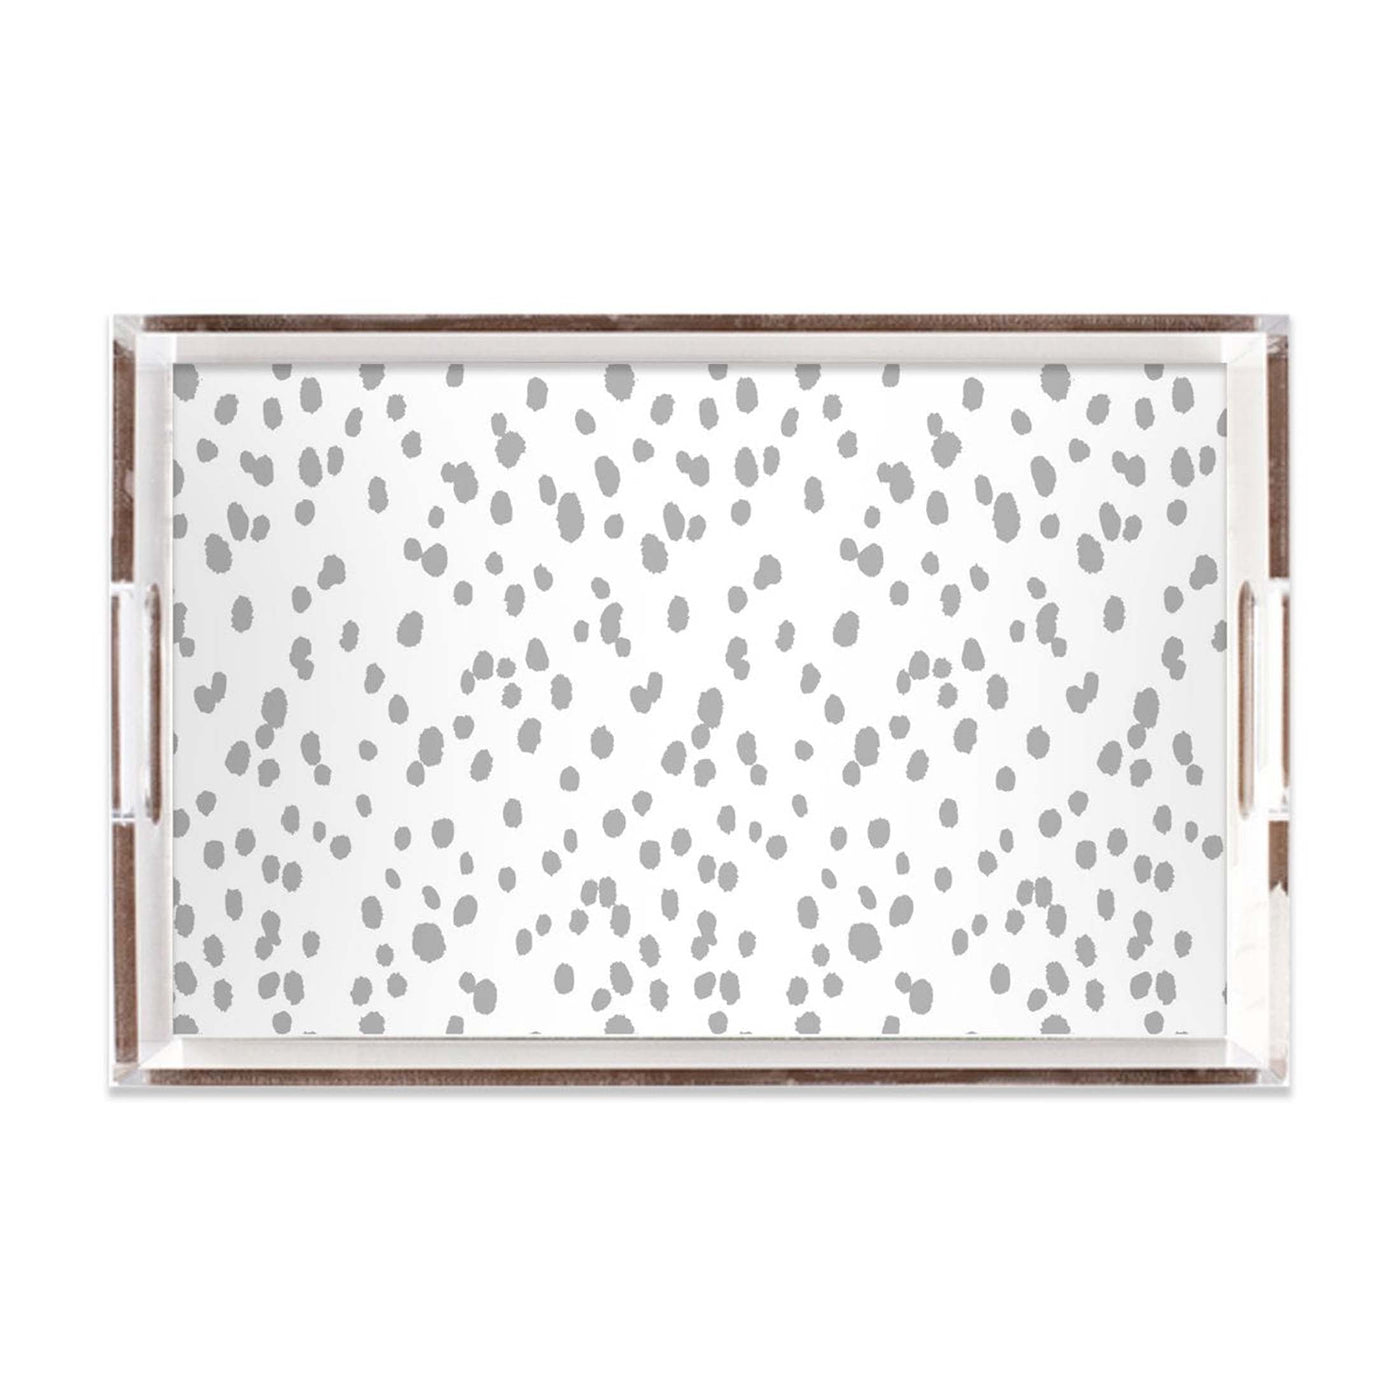 Lucite Trays Grey / 11x17 Seeing Spots Lucite Tray Katie Kime